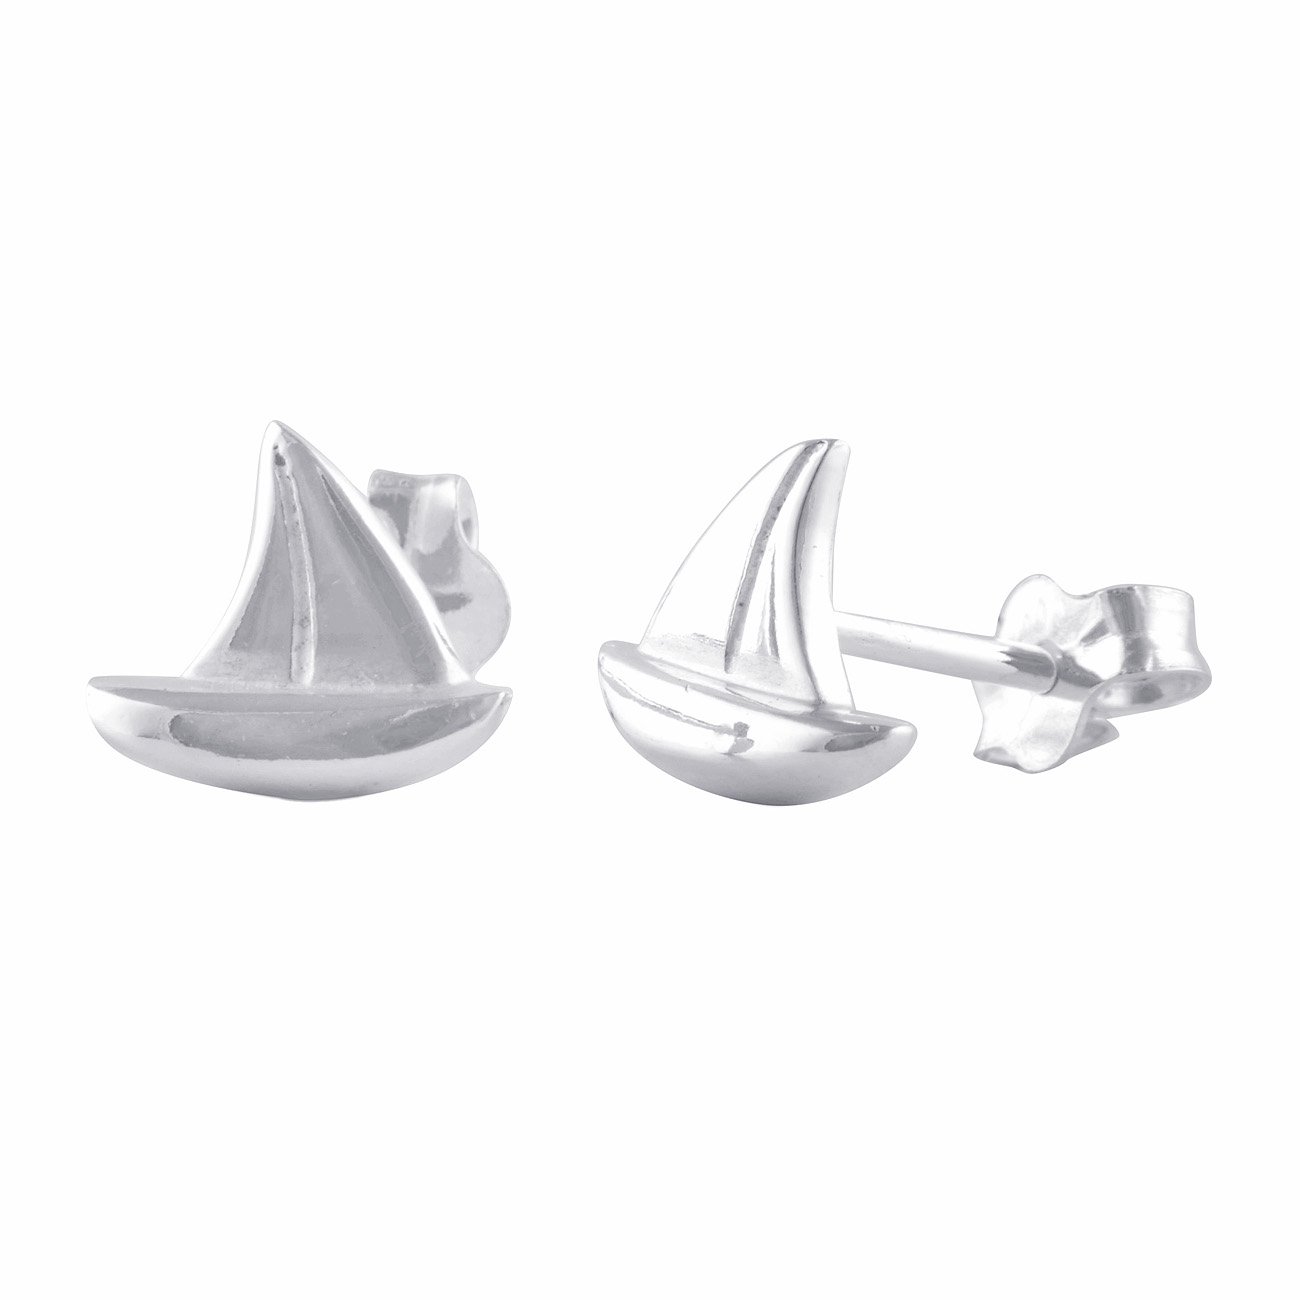 925 Sterling Silver Girls Nautical Sailboat Stud Earrings Sail Boat Studs - Gifts for Women Mothers Wife 0.31in